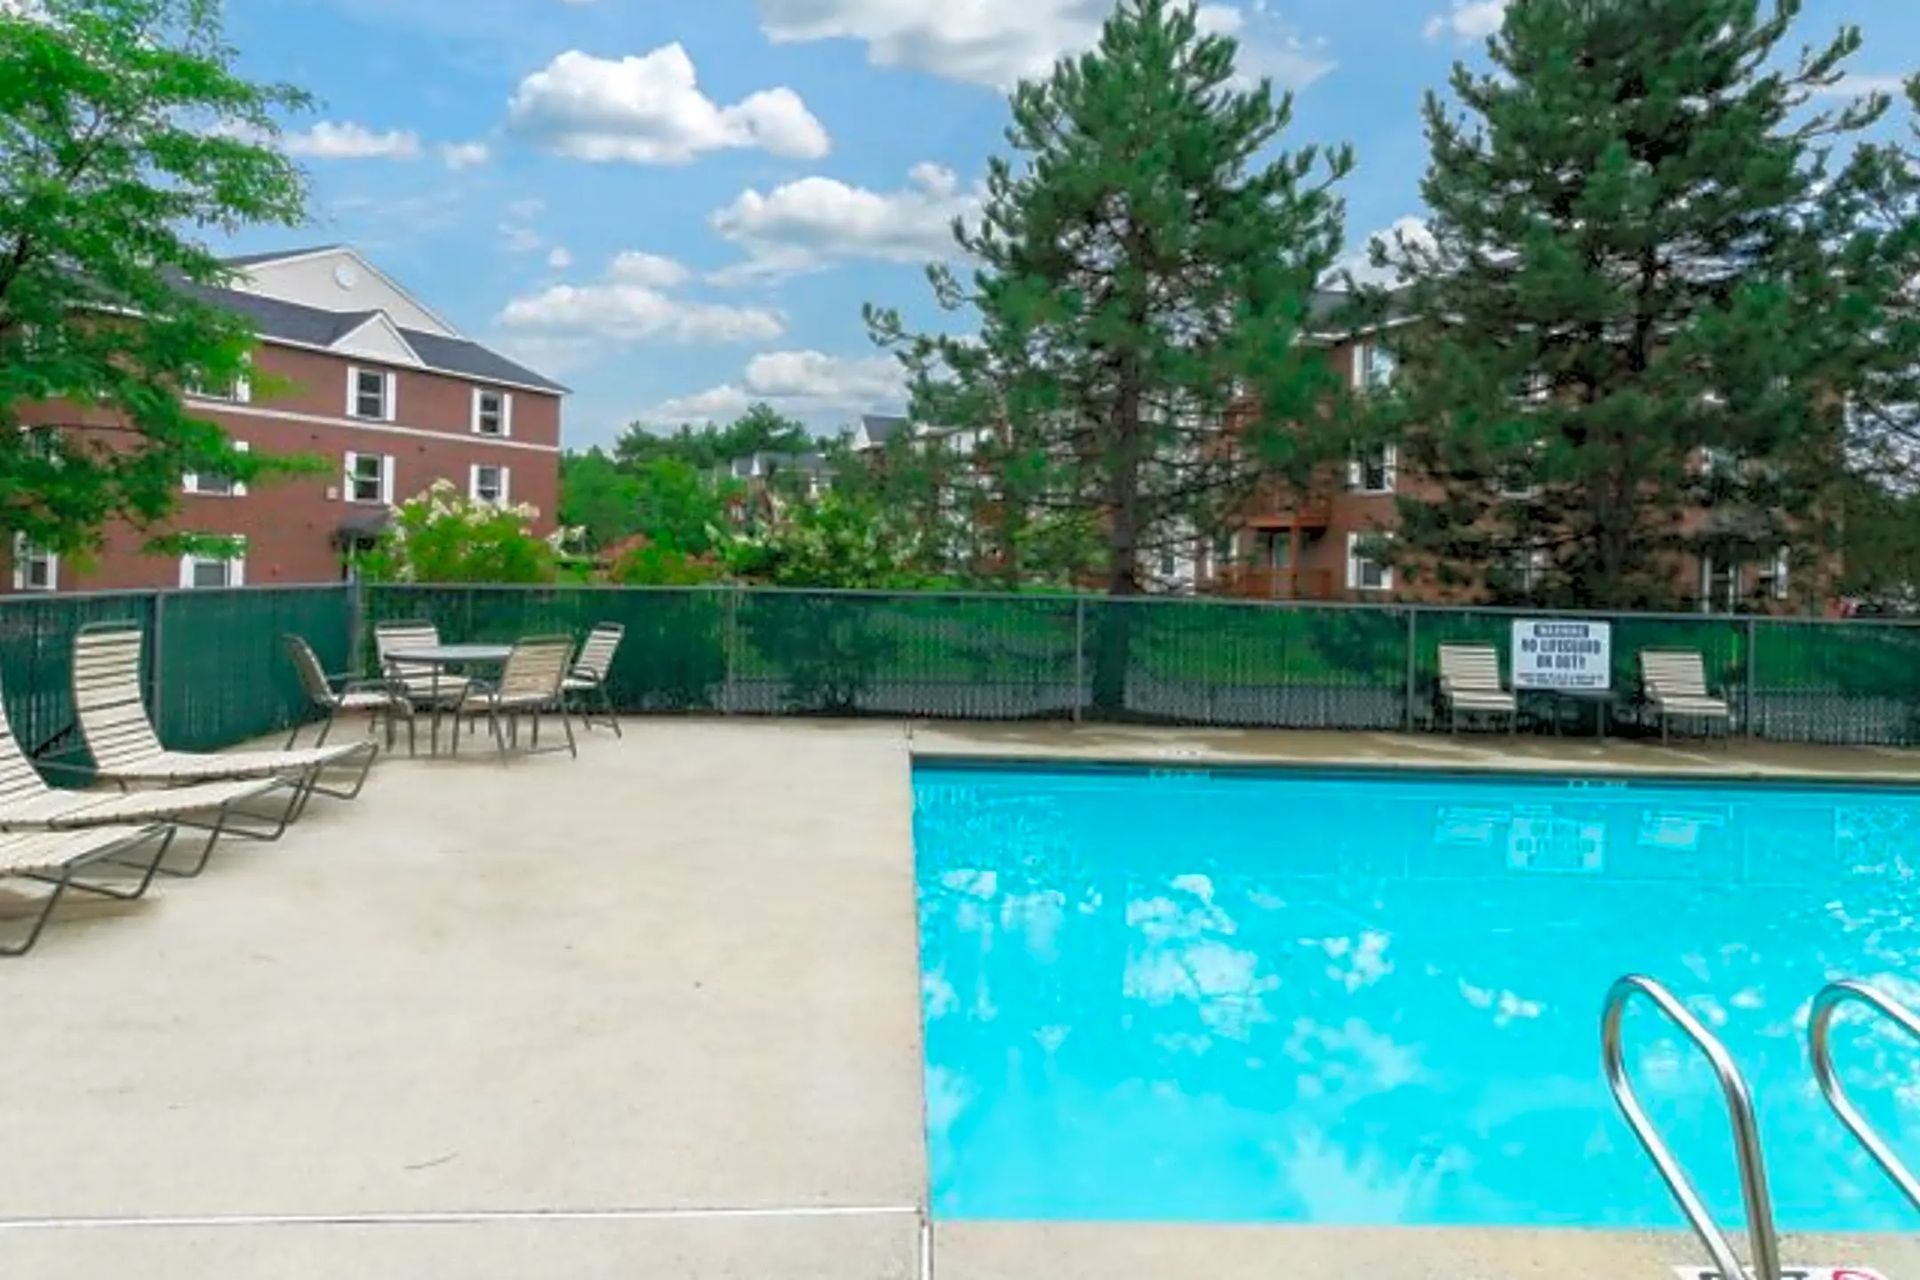 Swimming pool and poolside seating at Penacook Place Apartments.